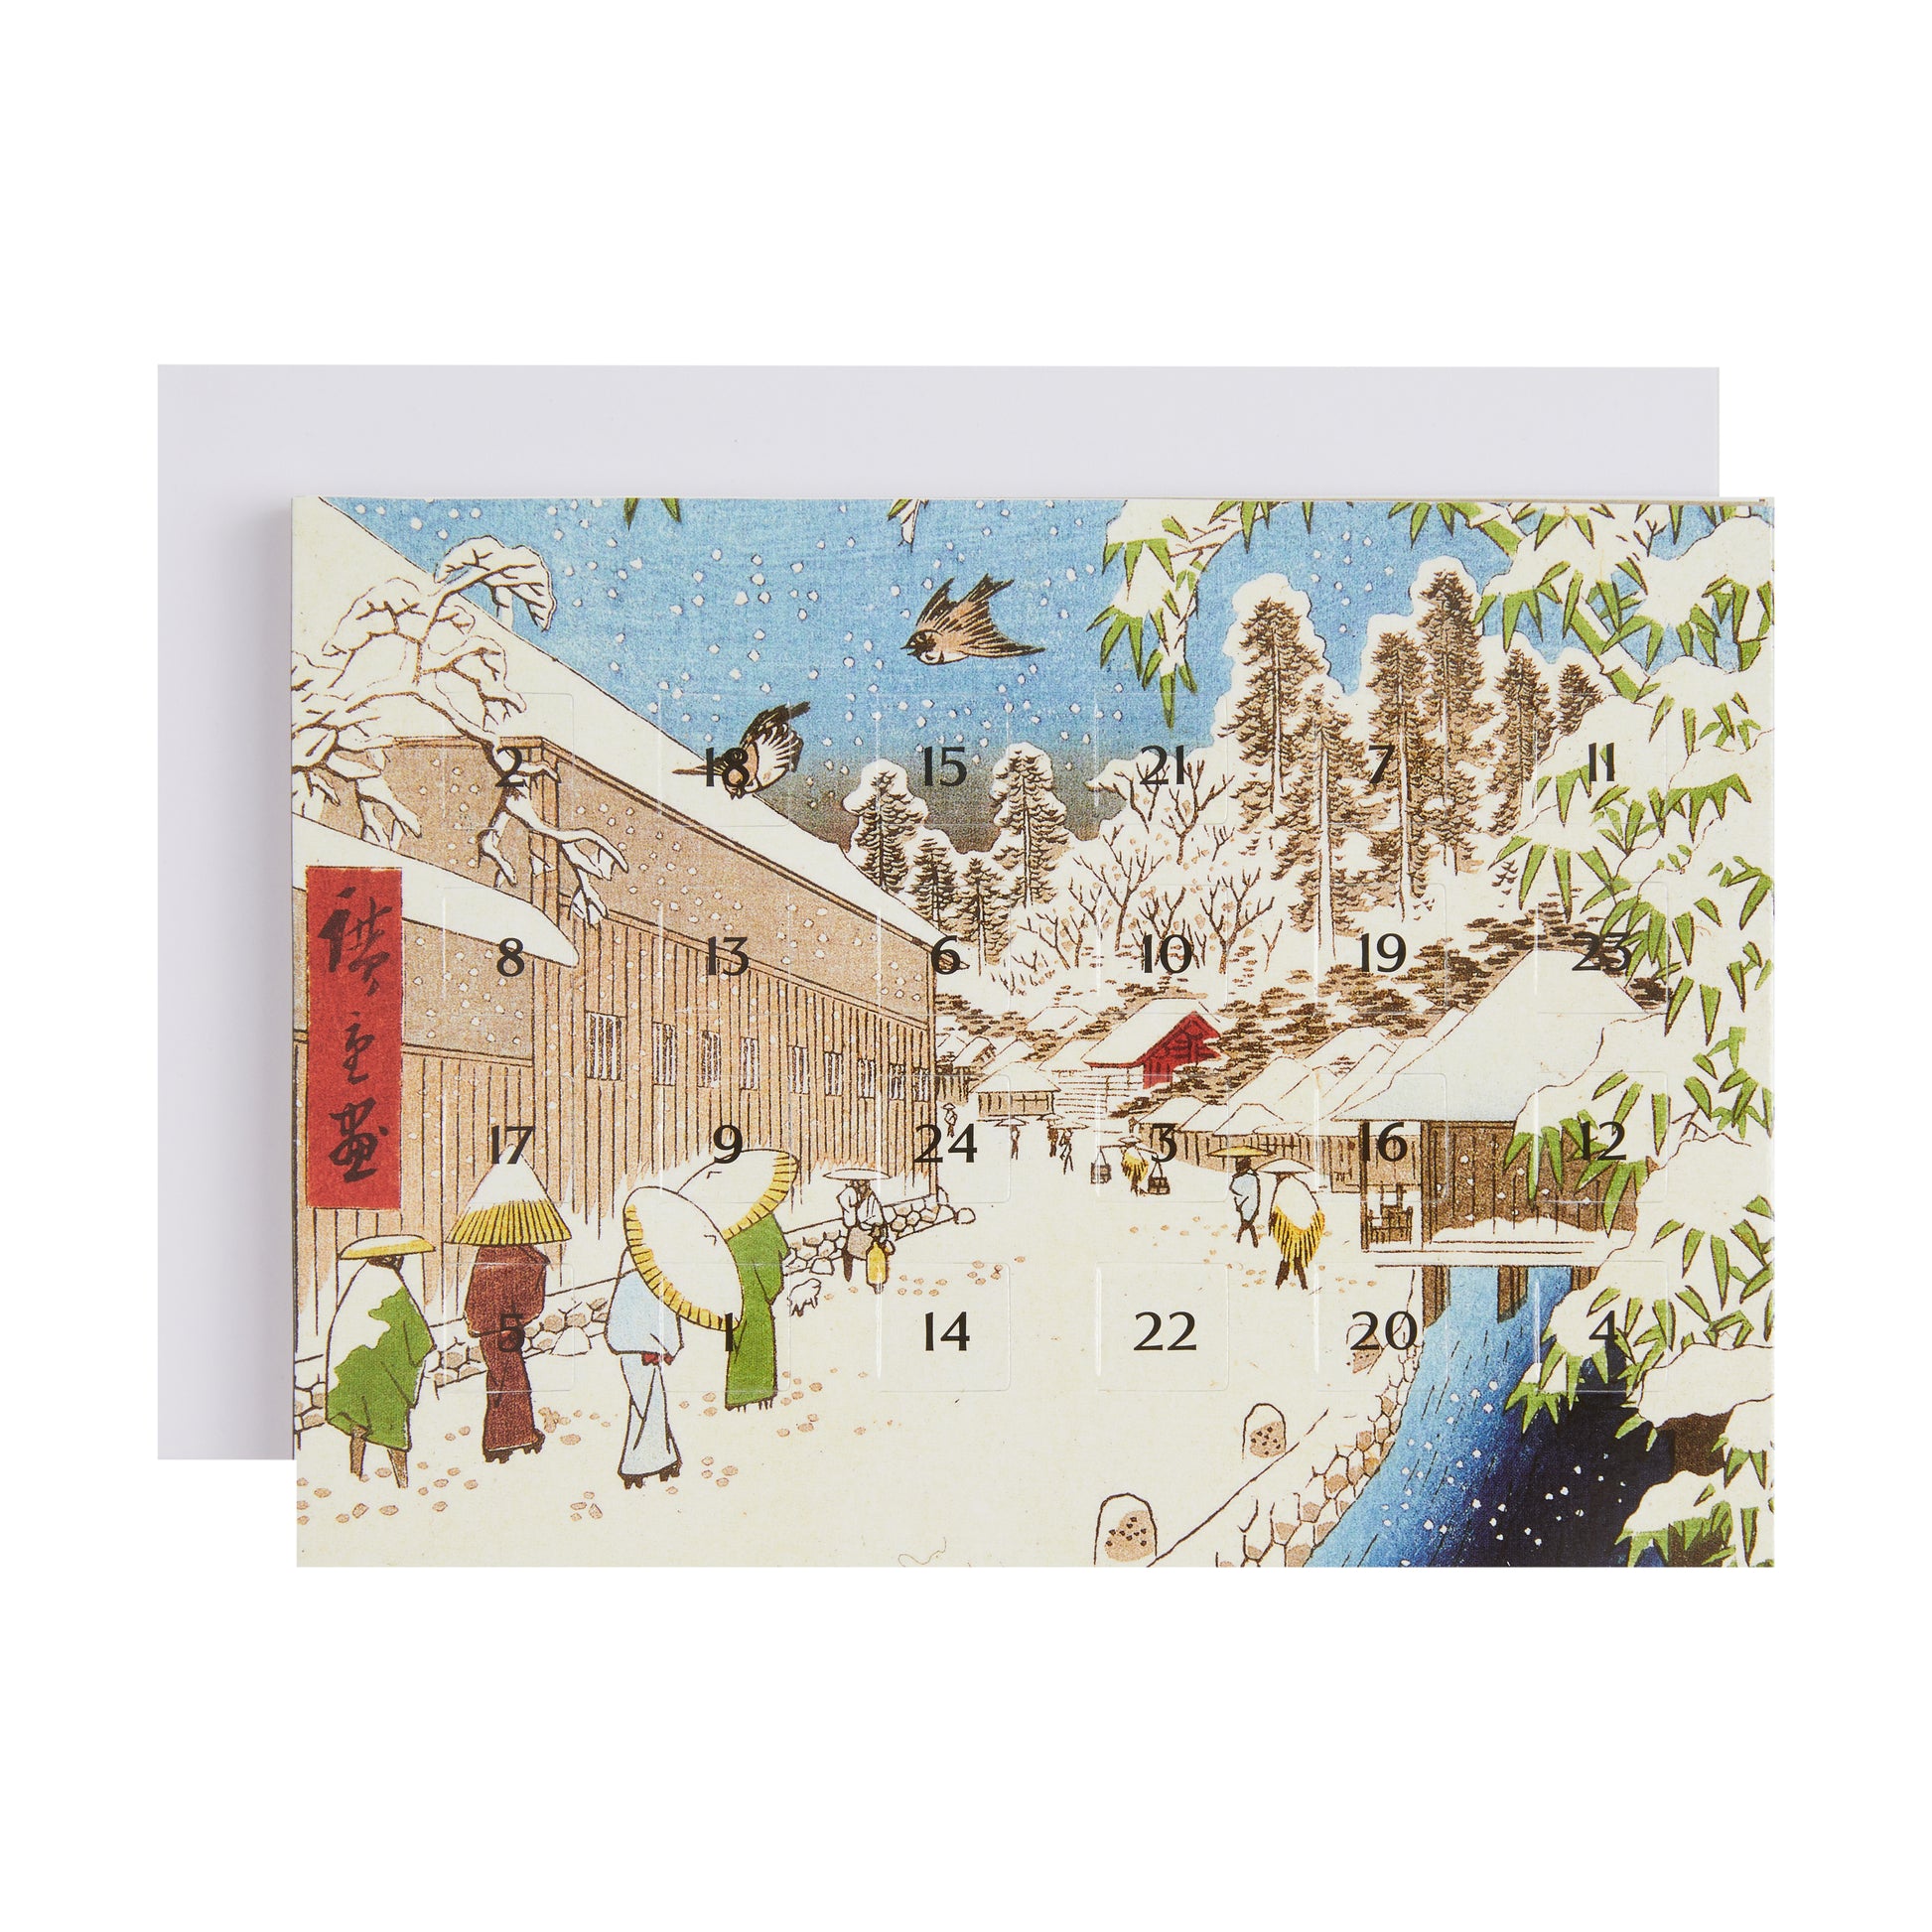 Advent card with envelope - Japanese snowy street scene by Hiroshige. From the collection of the Fitzwilliam Museum.